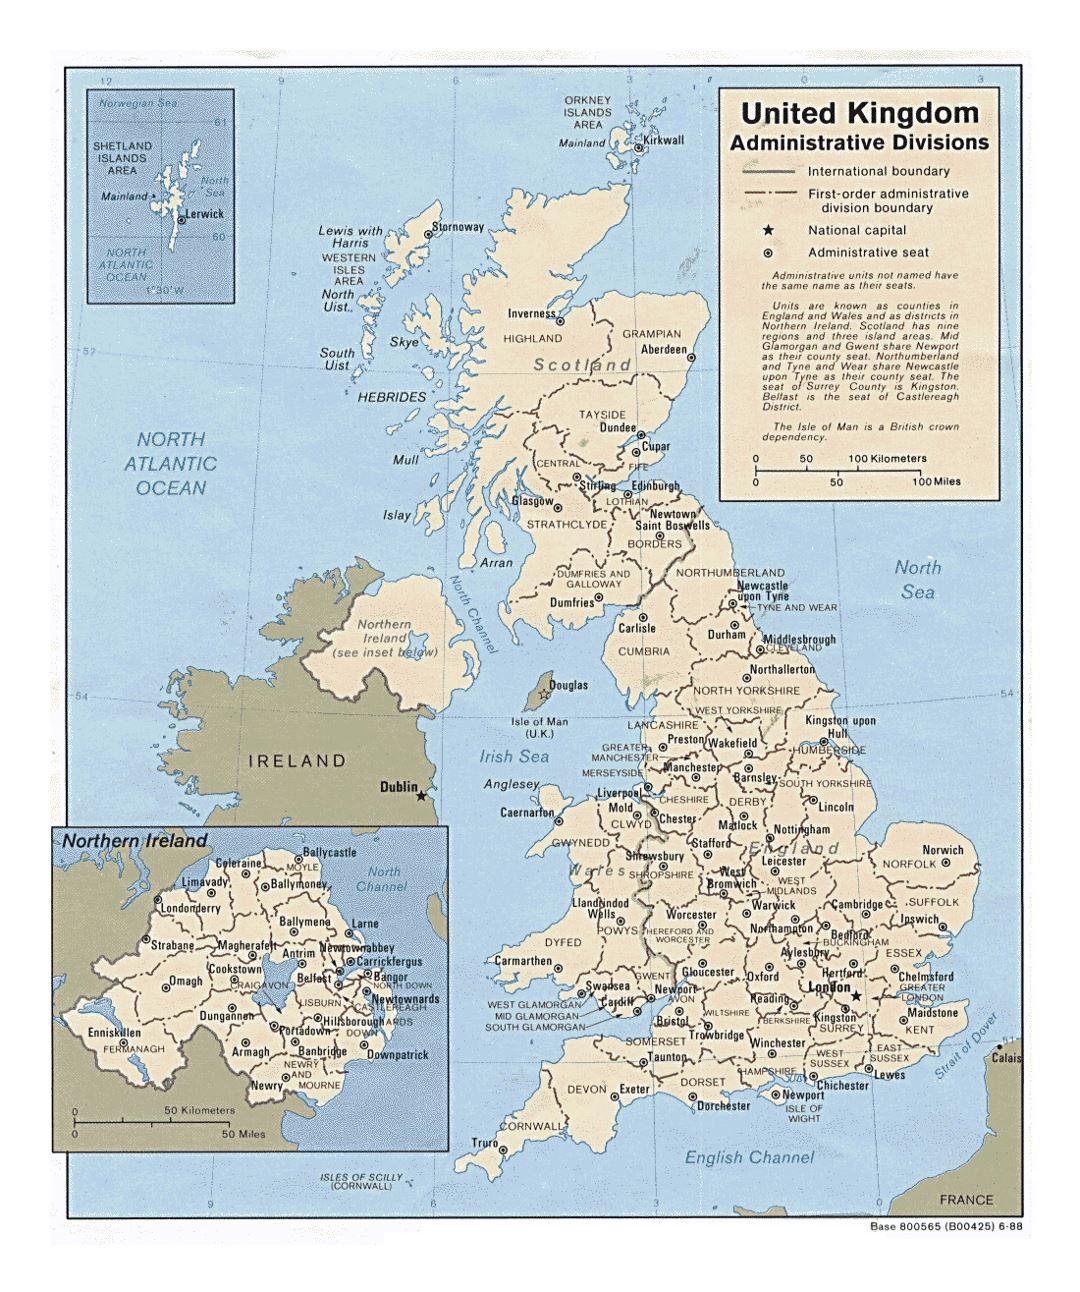 Detailed administrative divisions map of United Kingdom - 1988